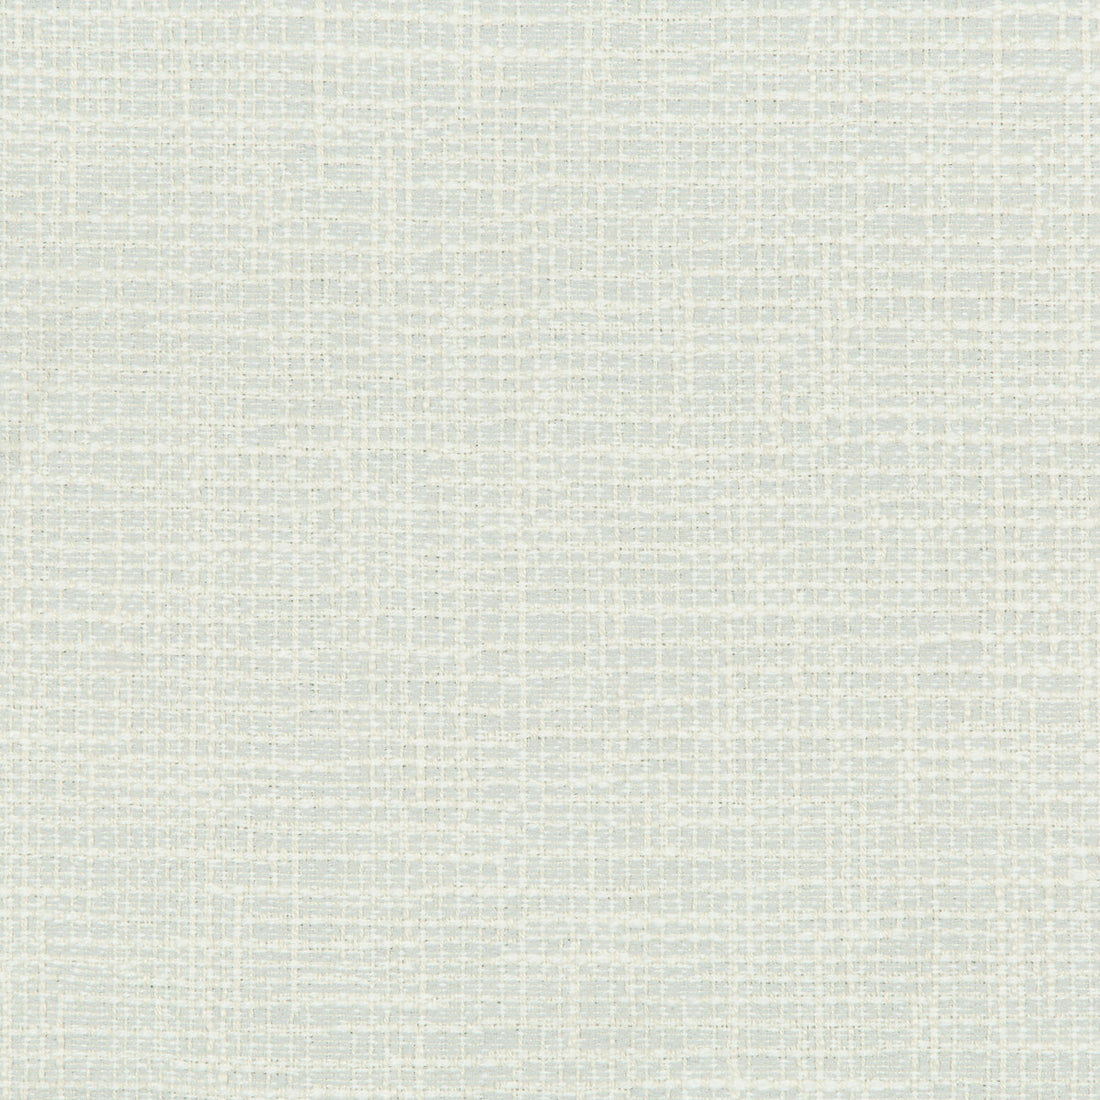 Kravet Design fabric in 36083-1116 color - pattern 36083.1116.0 - by Kravet Design in the Inside Out Performance Fabrics collection